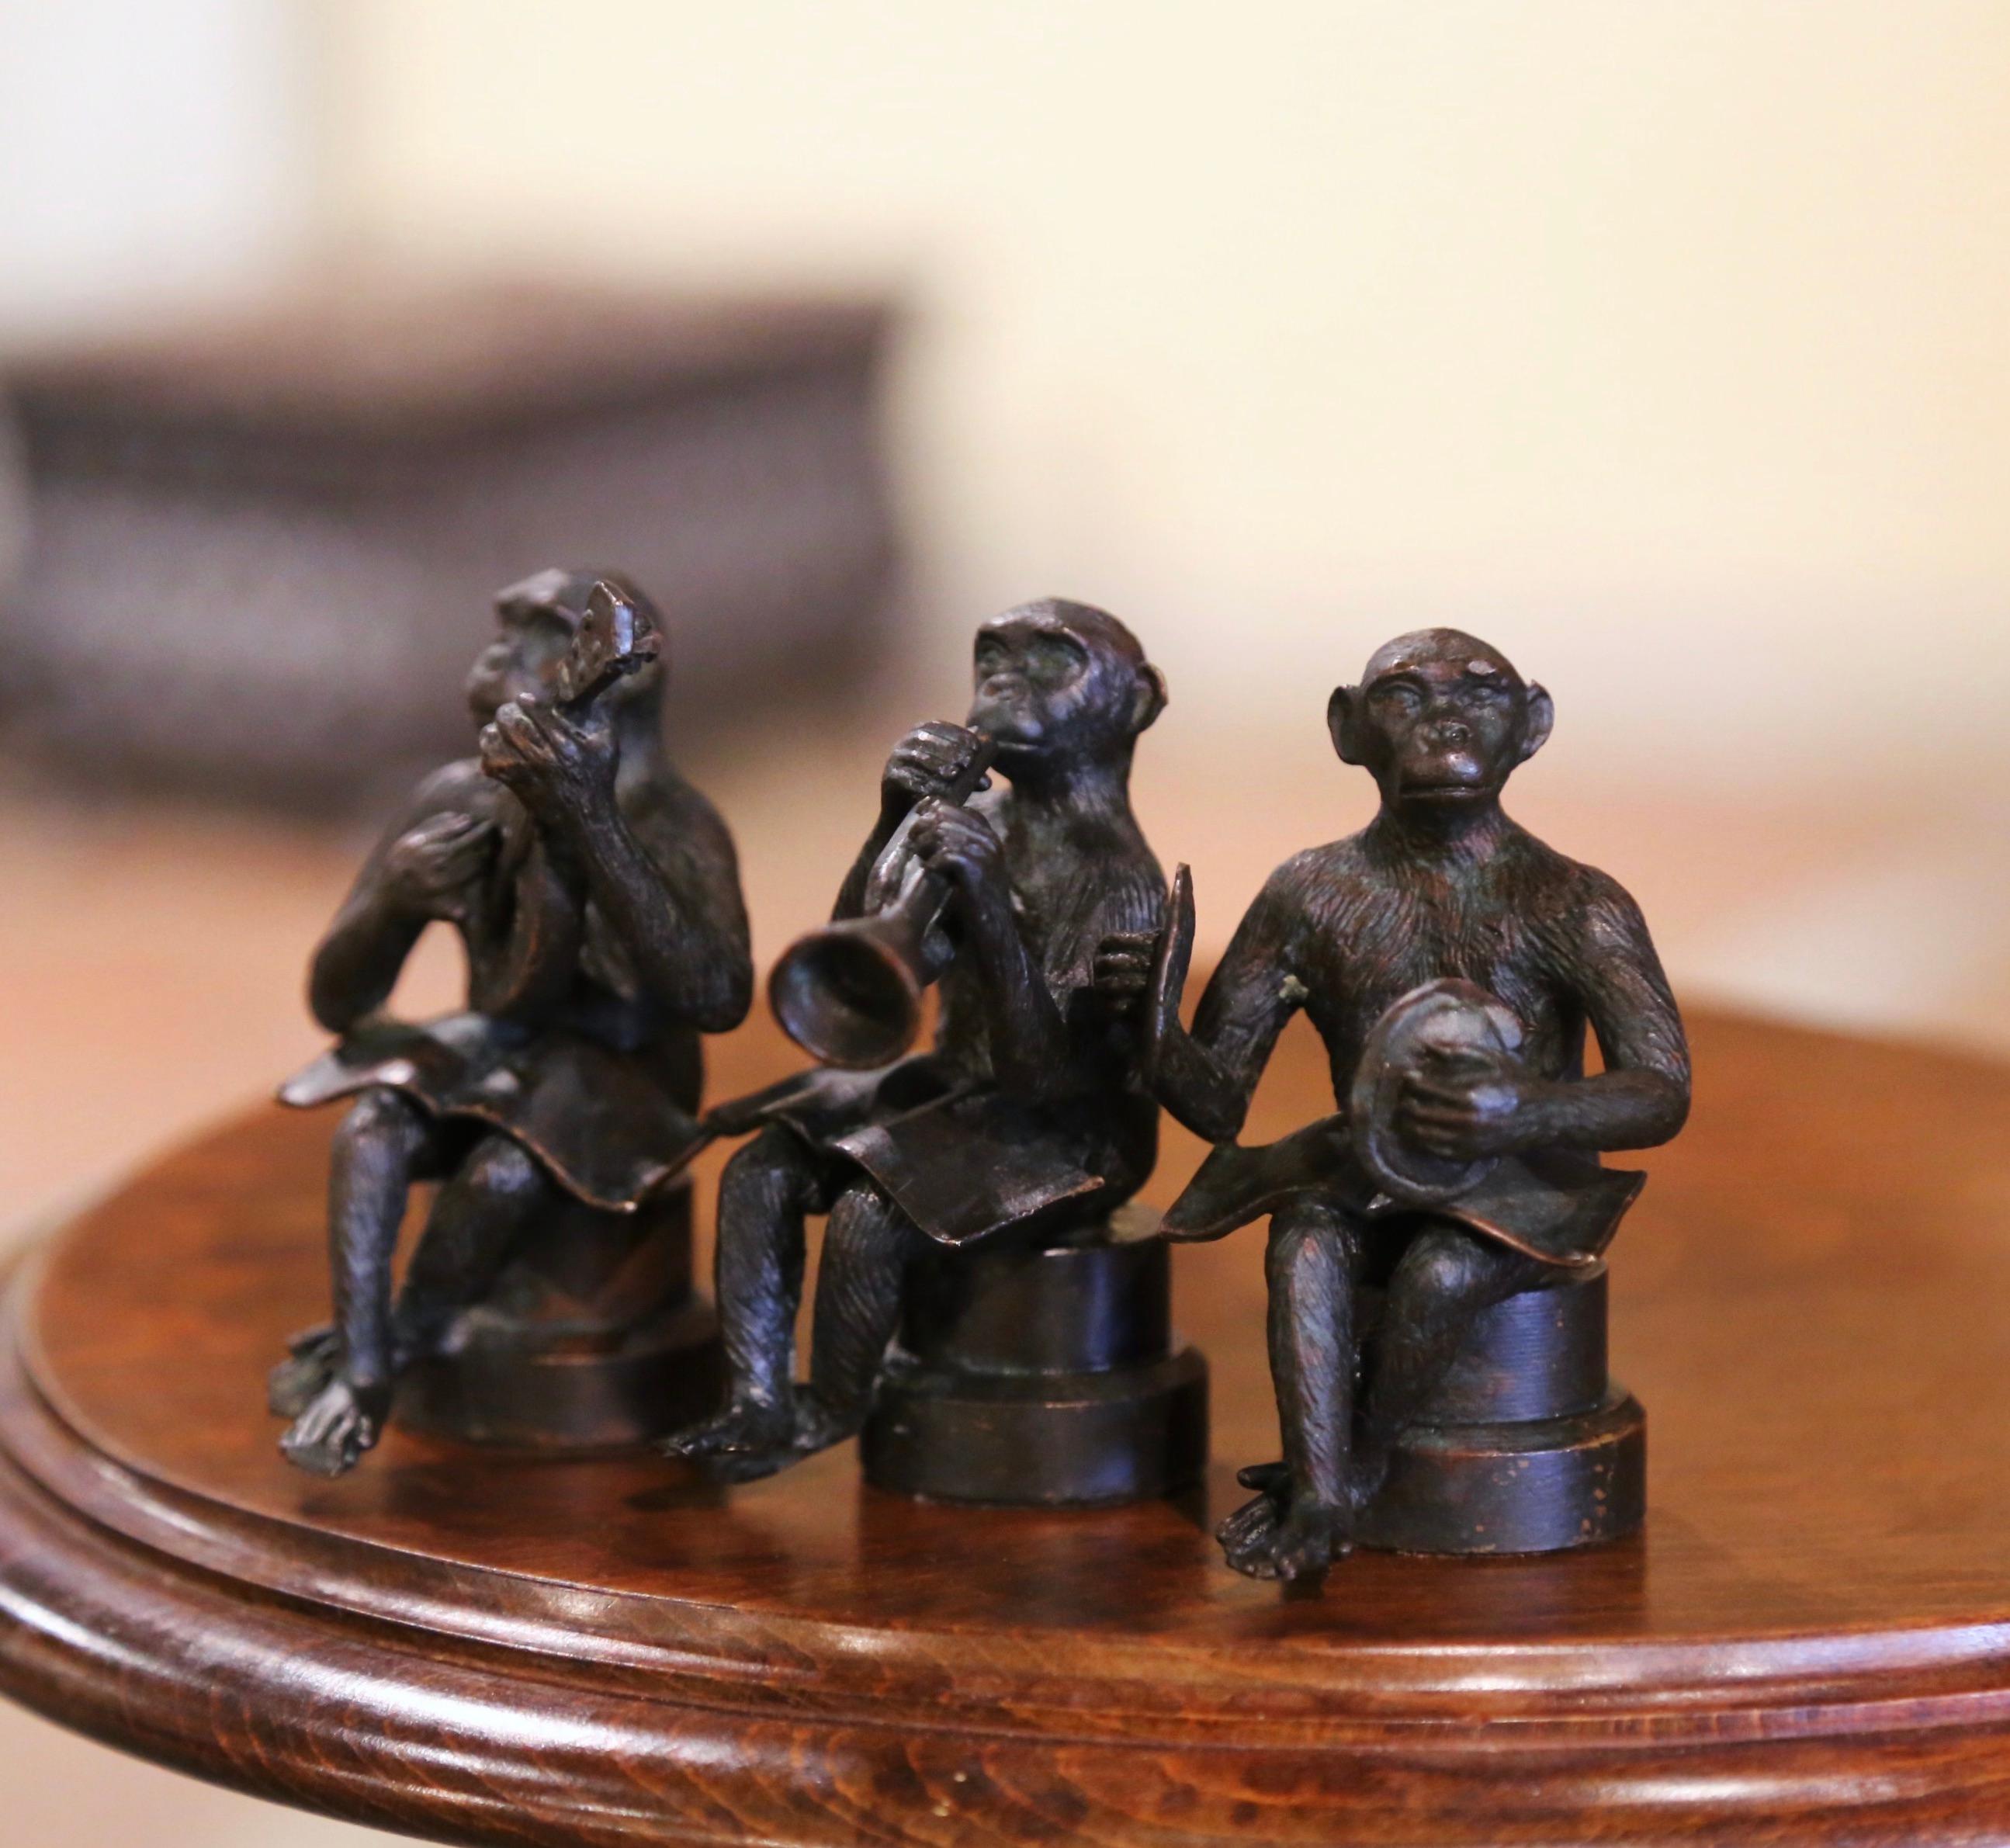 Decorate a library shelf or office with this set of antique miniature monkey sculptures. Created in France circa 1920, each Chimp is seated on a stool and playing an instrument with a music sheet spread across their laps; there is one monkey blowing